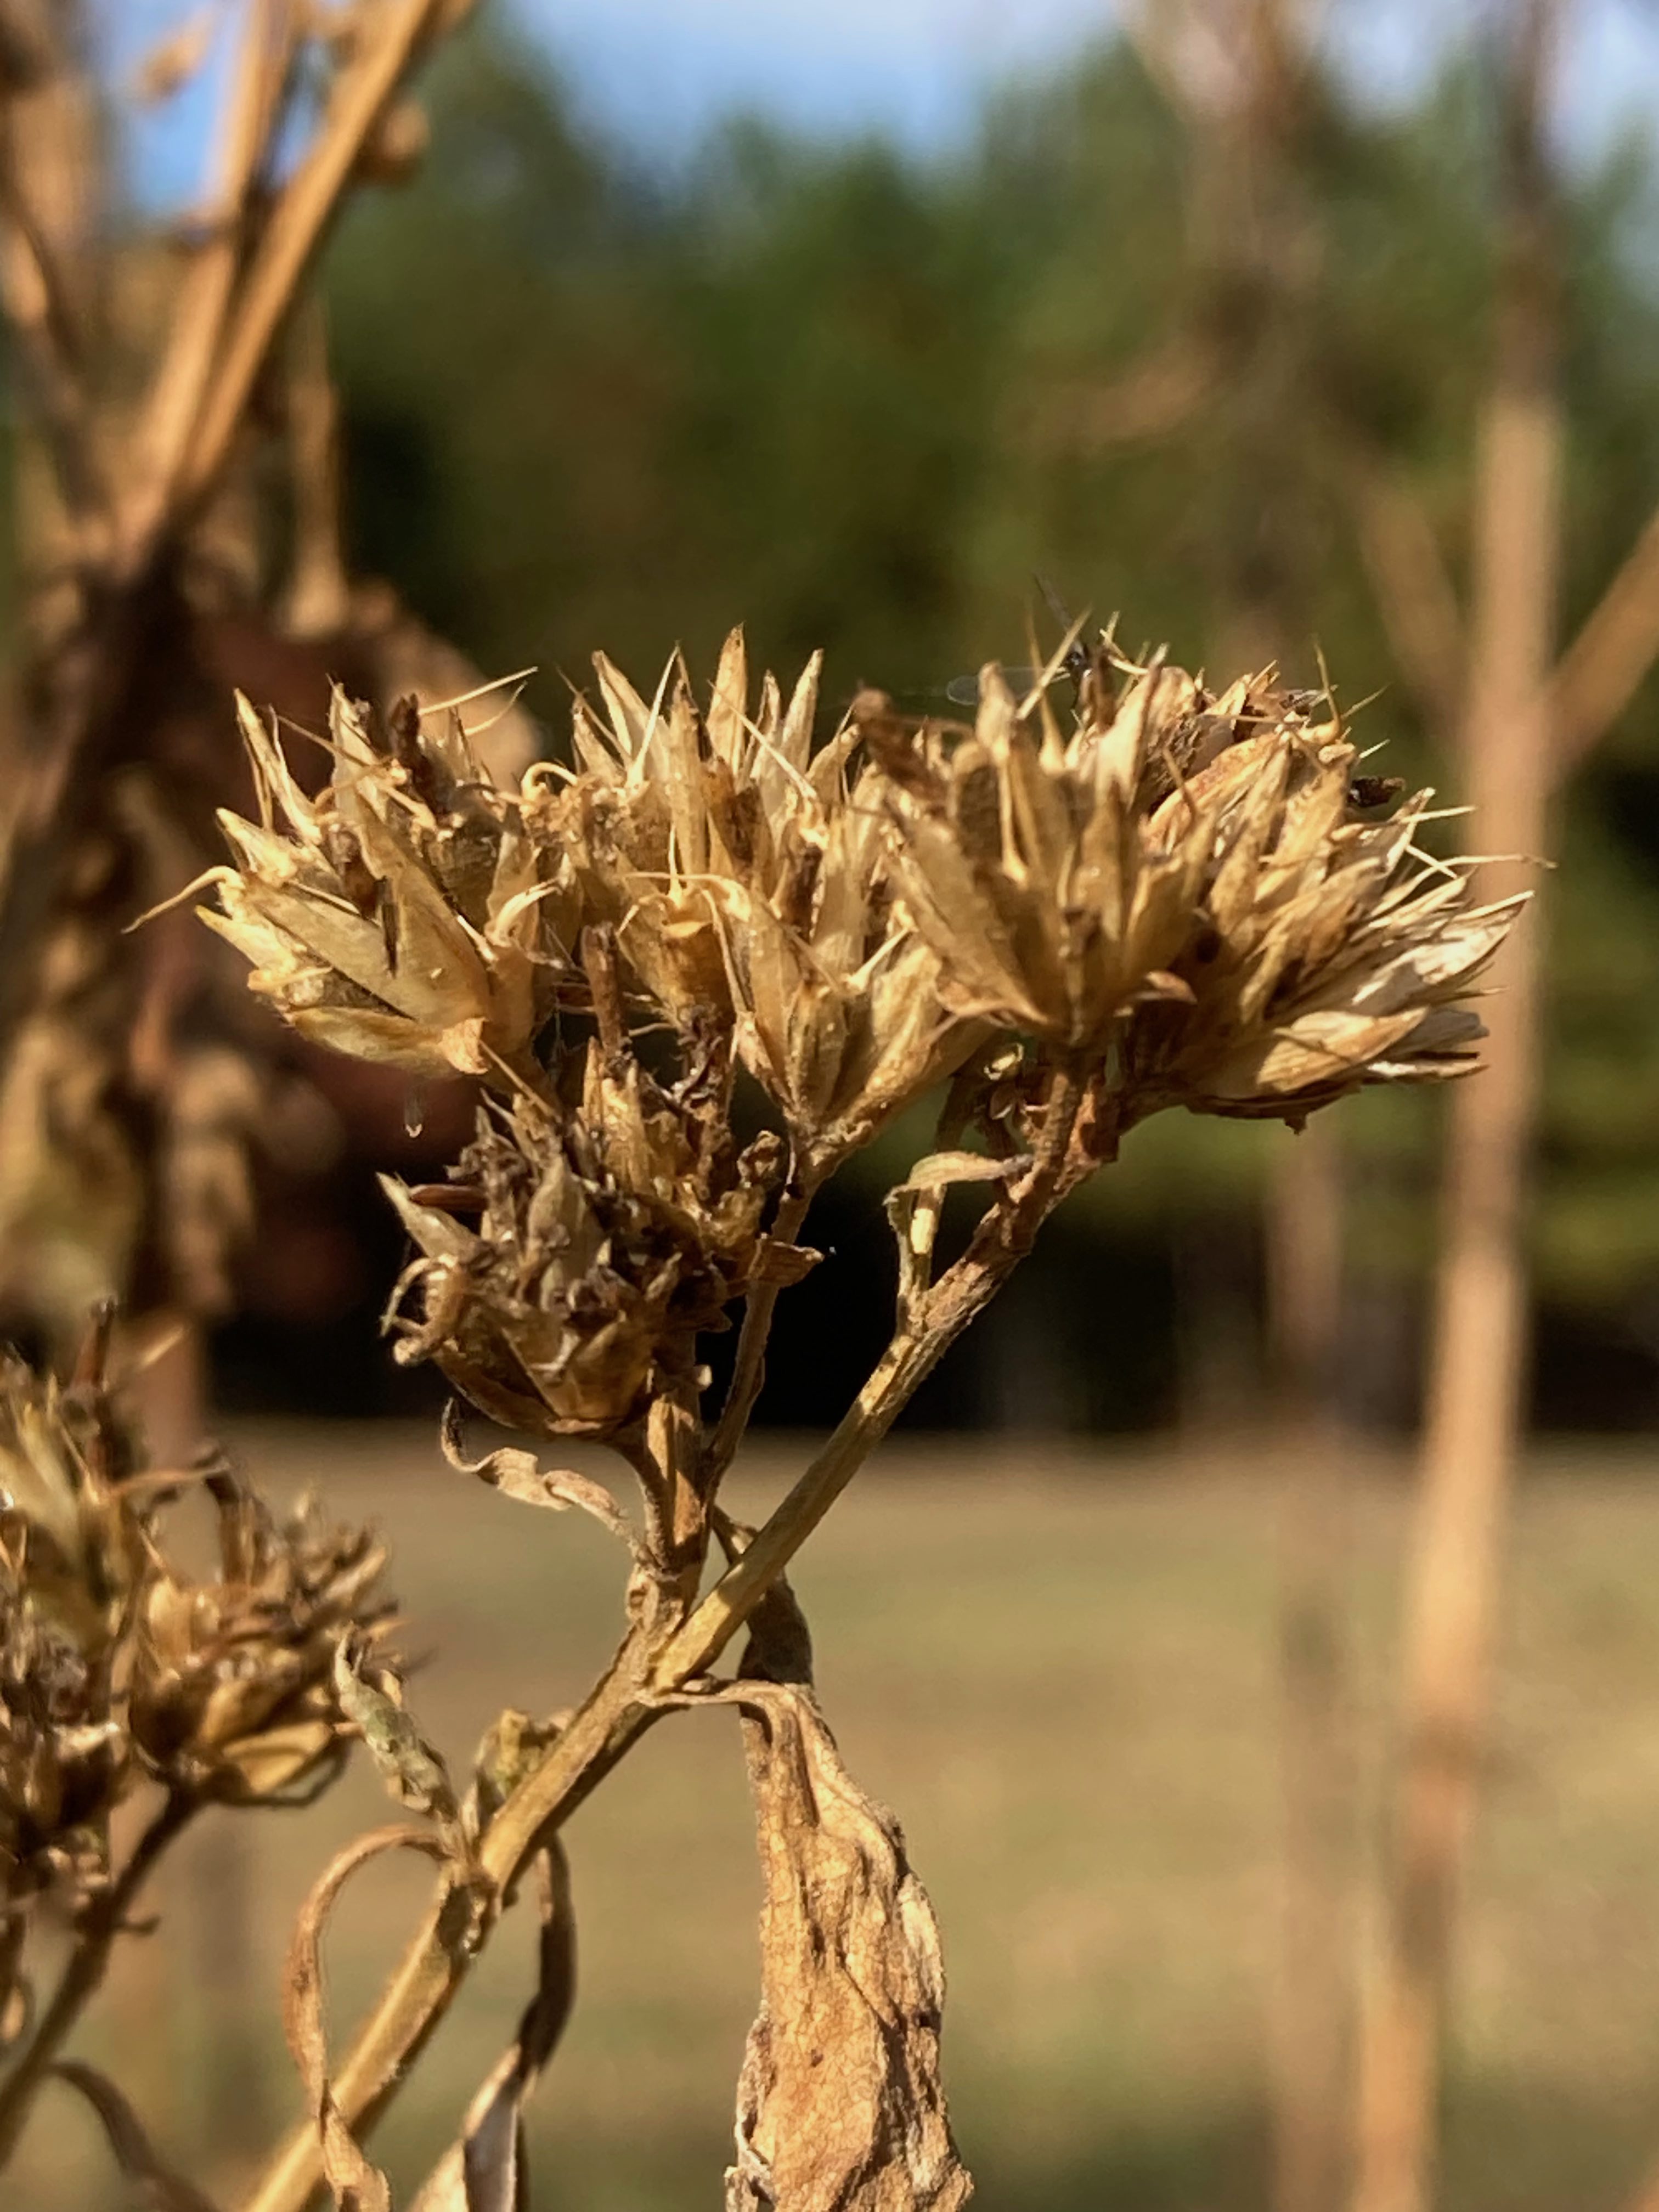 The Scientific Name is Verbesina occidentalis. You will likely hear them called Southern Crownbeard, Yellow Crownbeard, Stick-weed. This picture shows the Dried flower heads in November. of Verbesina occidentalis